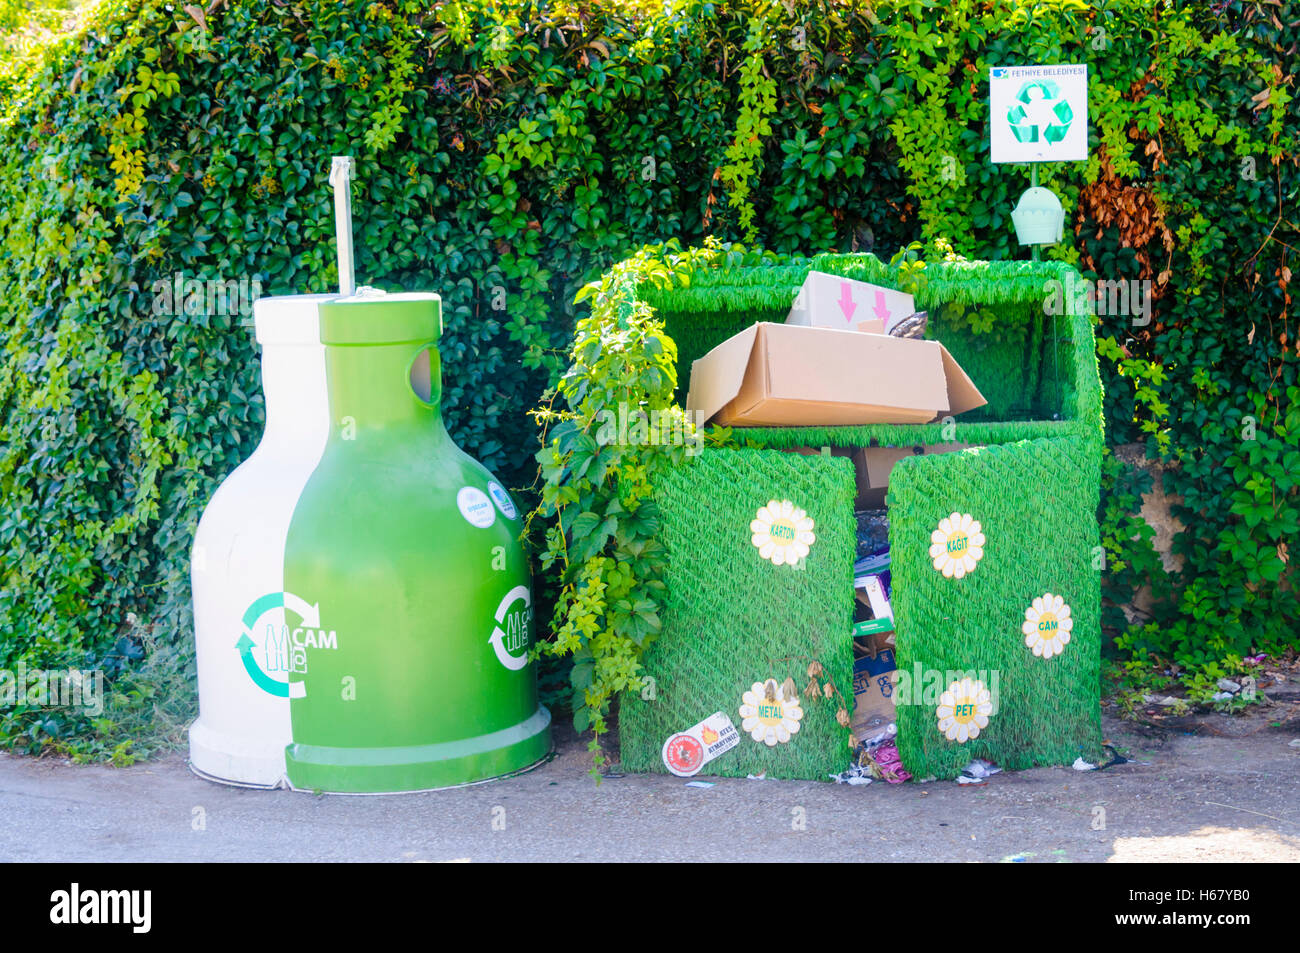 Recycling centre with a plastic container, and a bin covered in artificial grass to make it more attractive Stock Photo